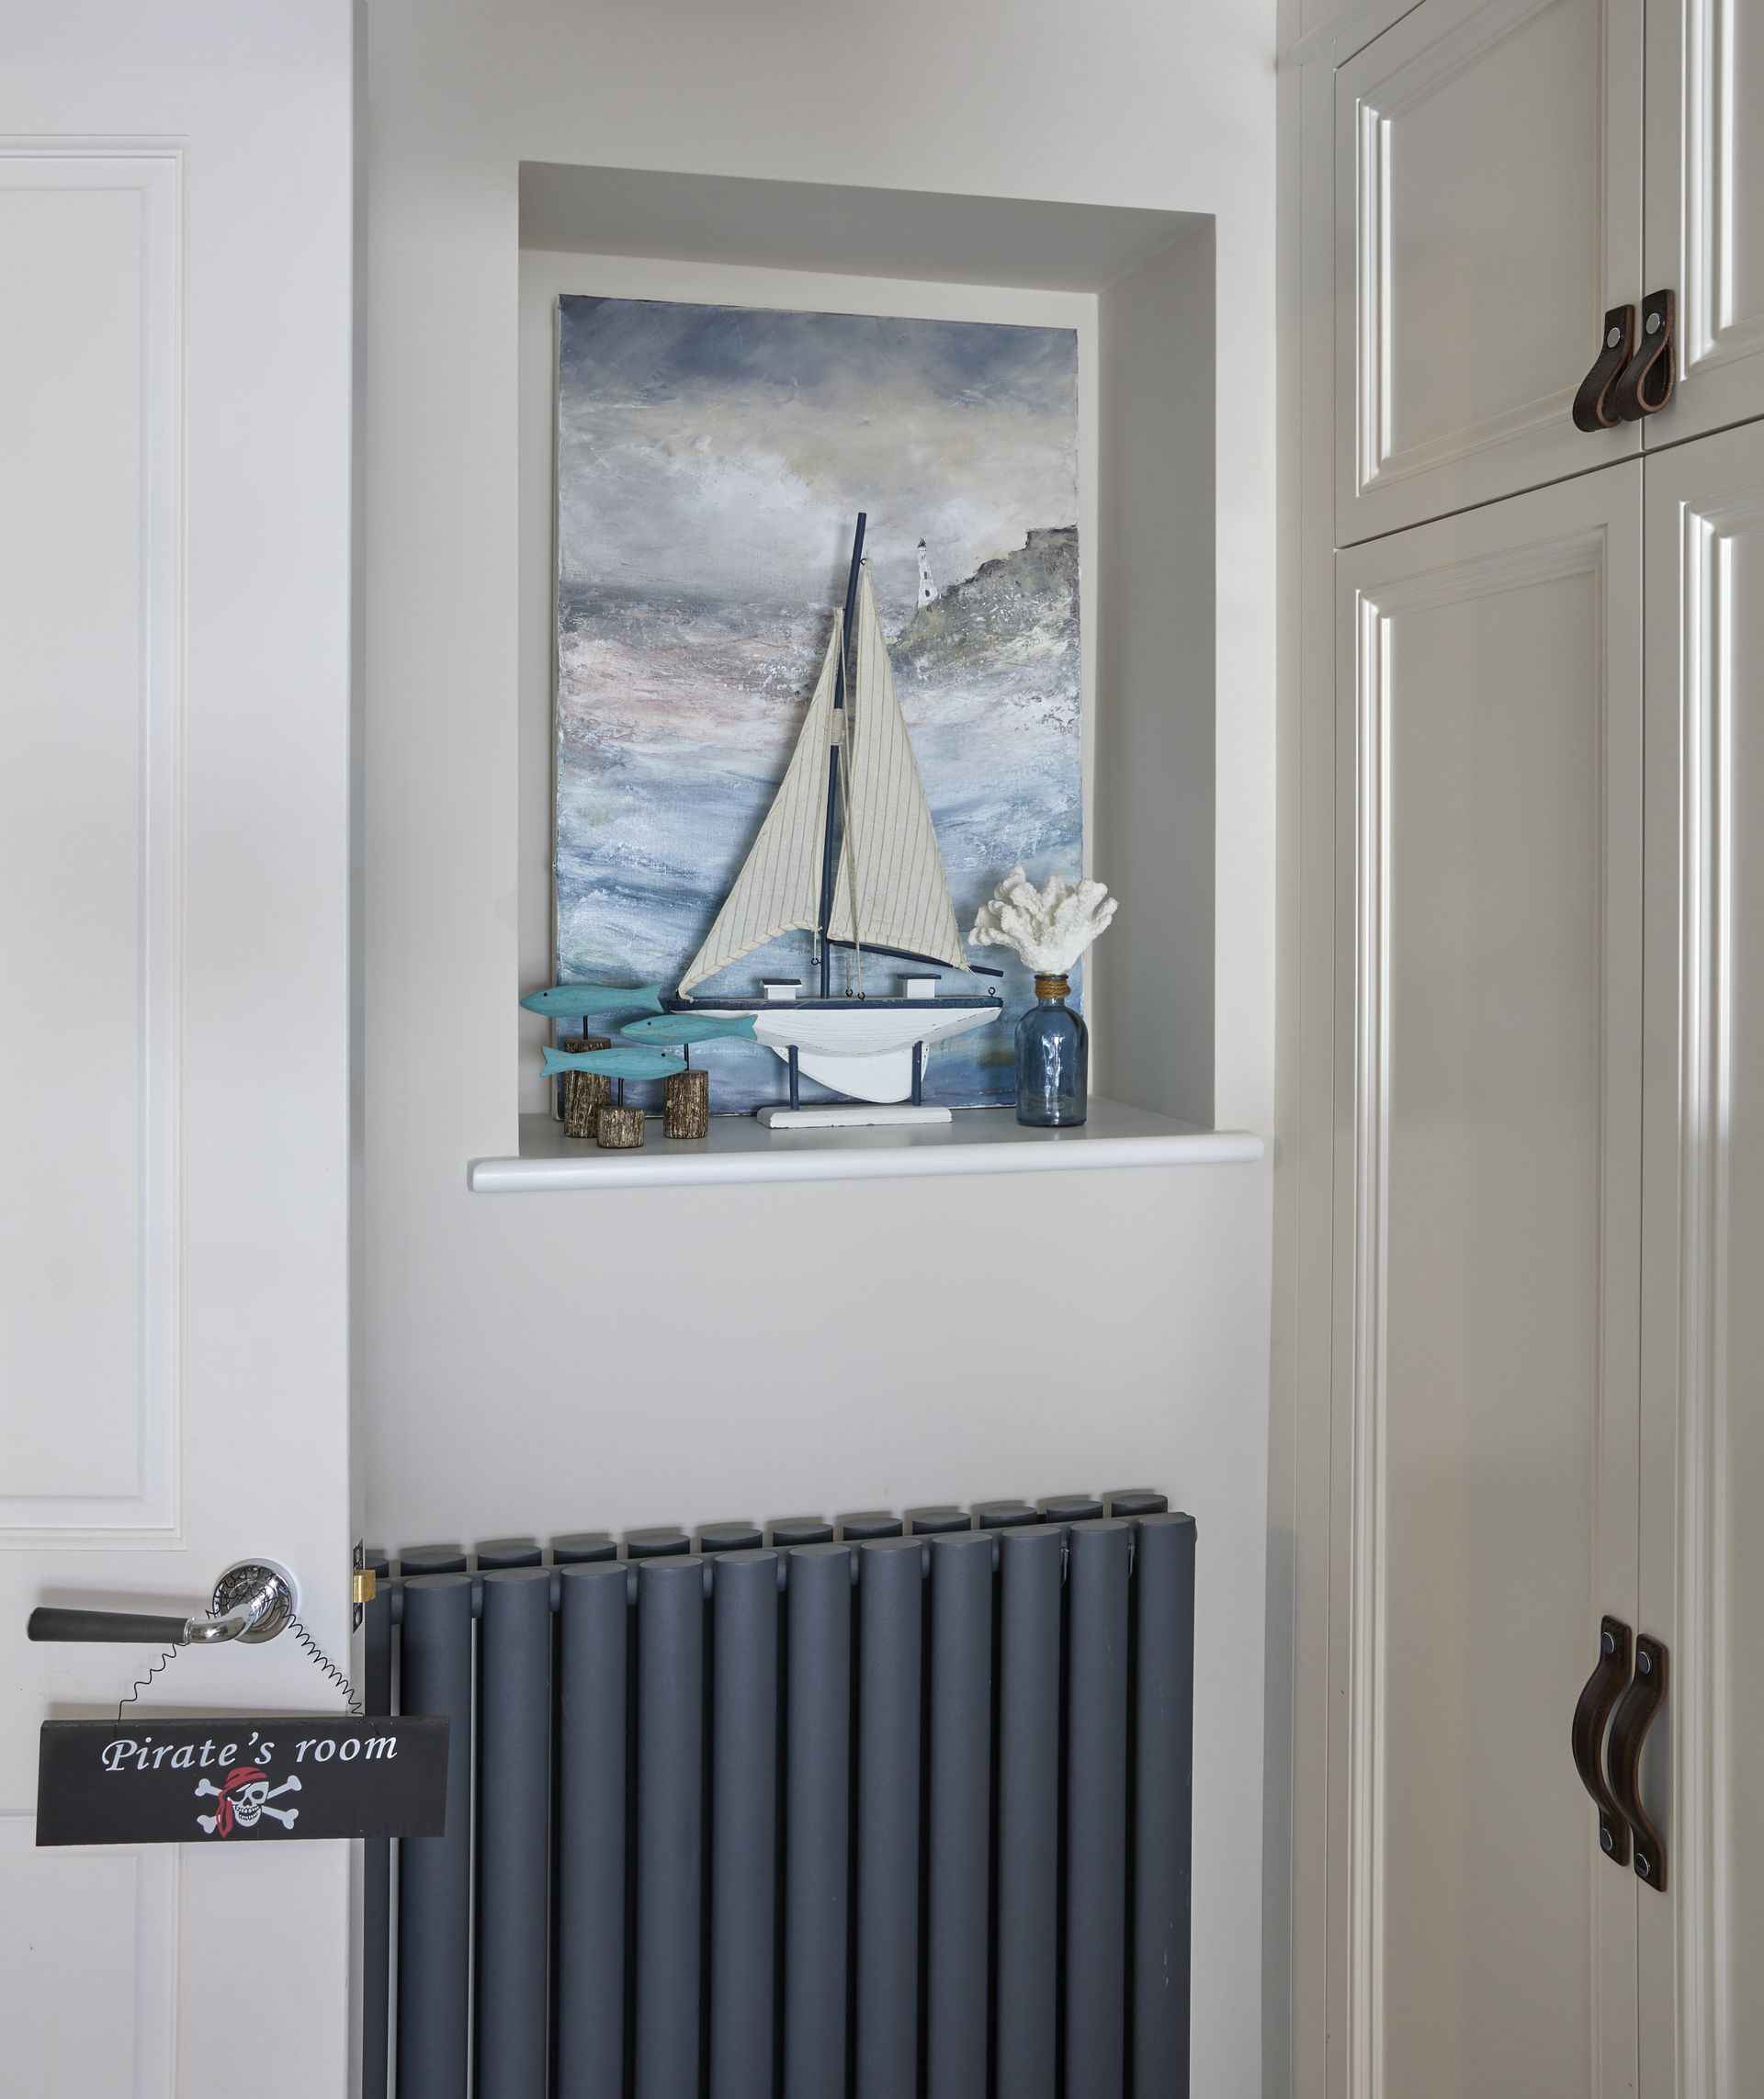 Sea and boat picture on the wall of the pirate room of mountain ash house